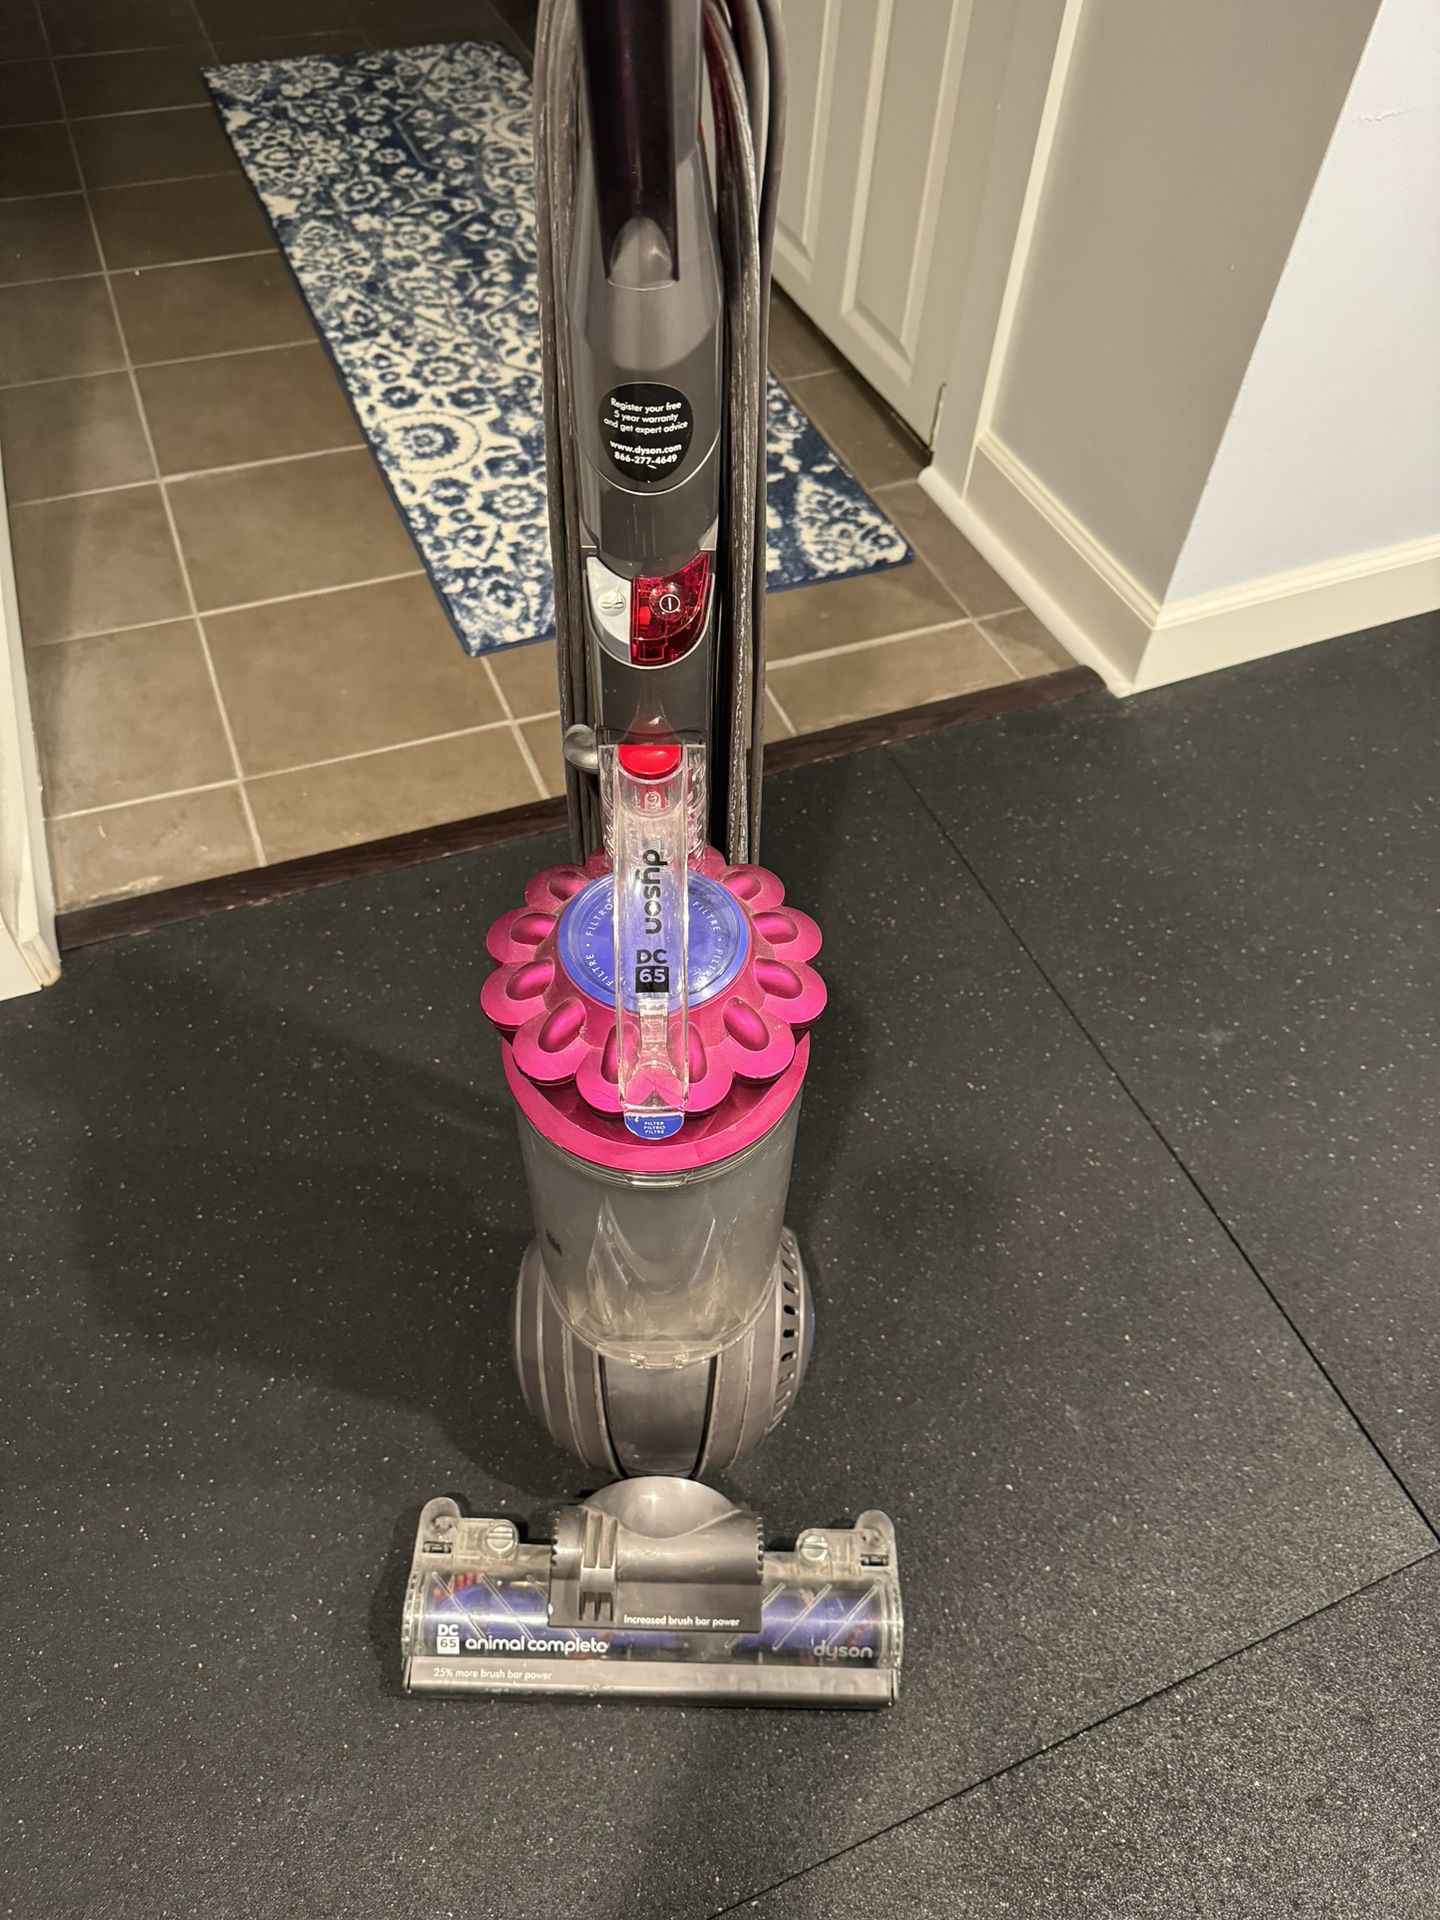 For Sale - Dyson DC 65 animal vacuum cleaner